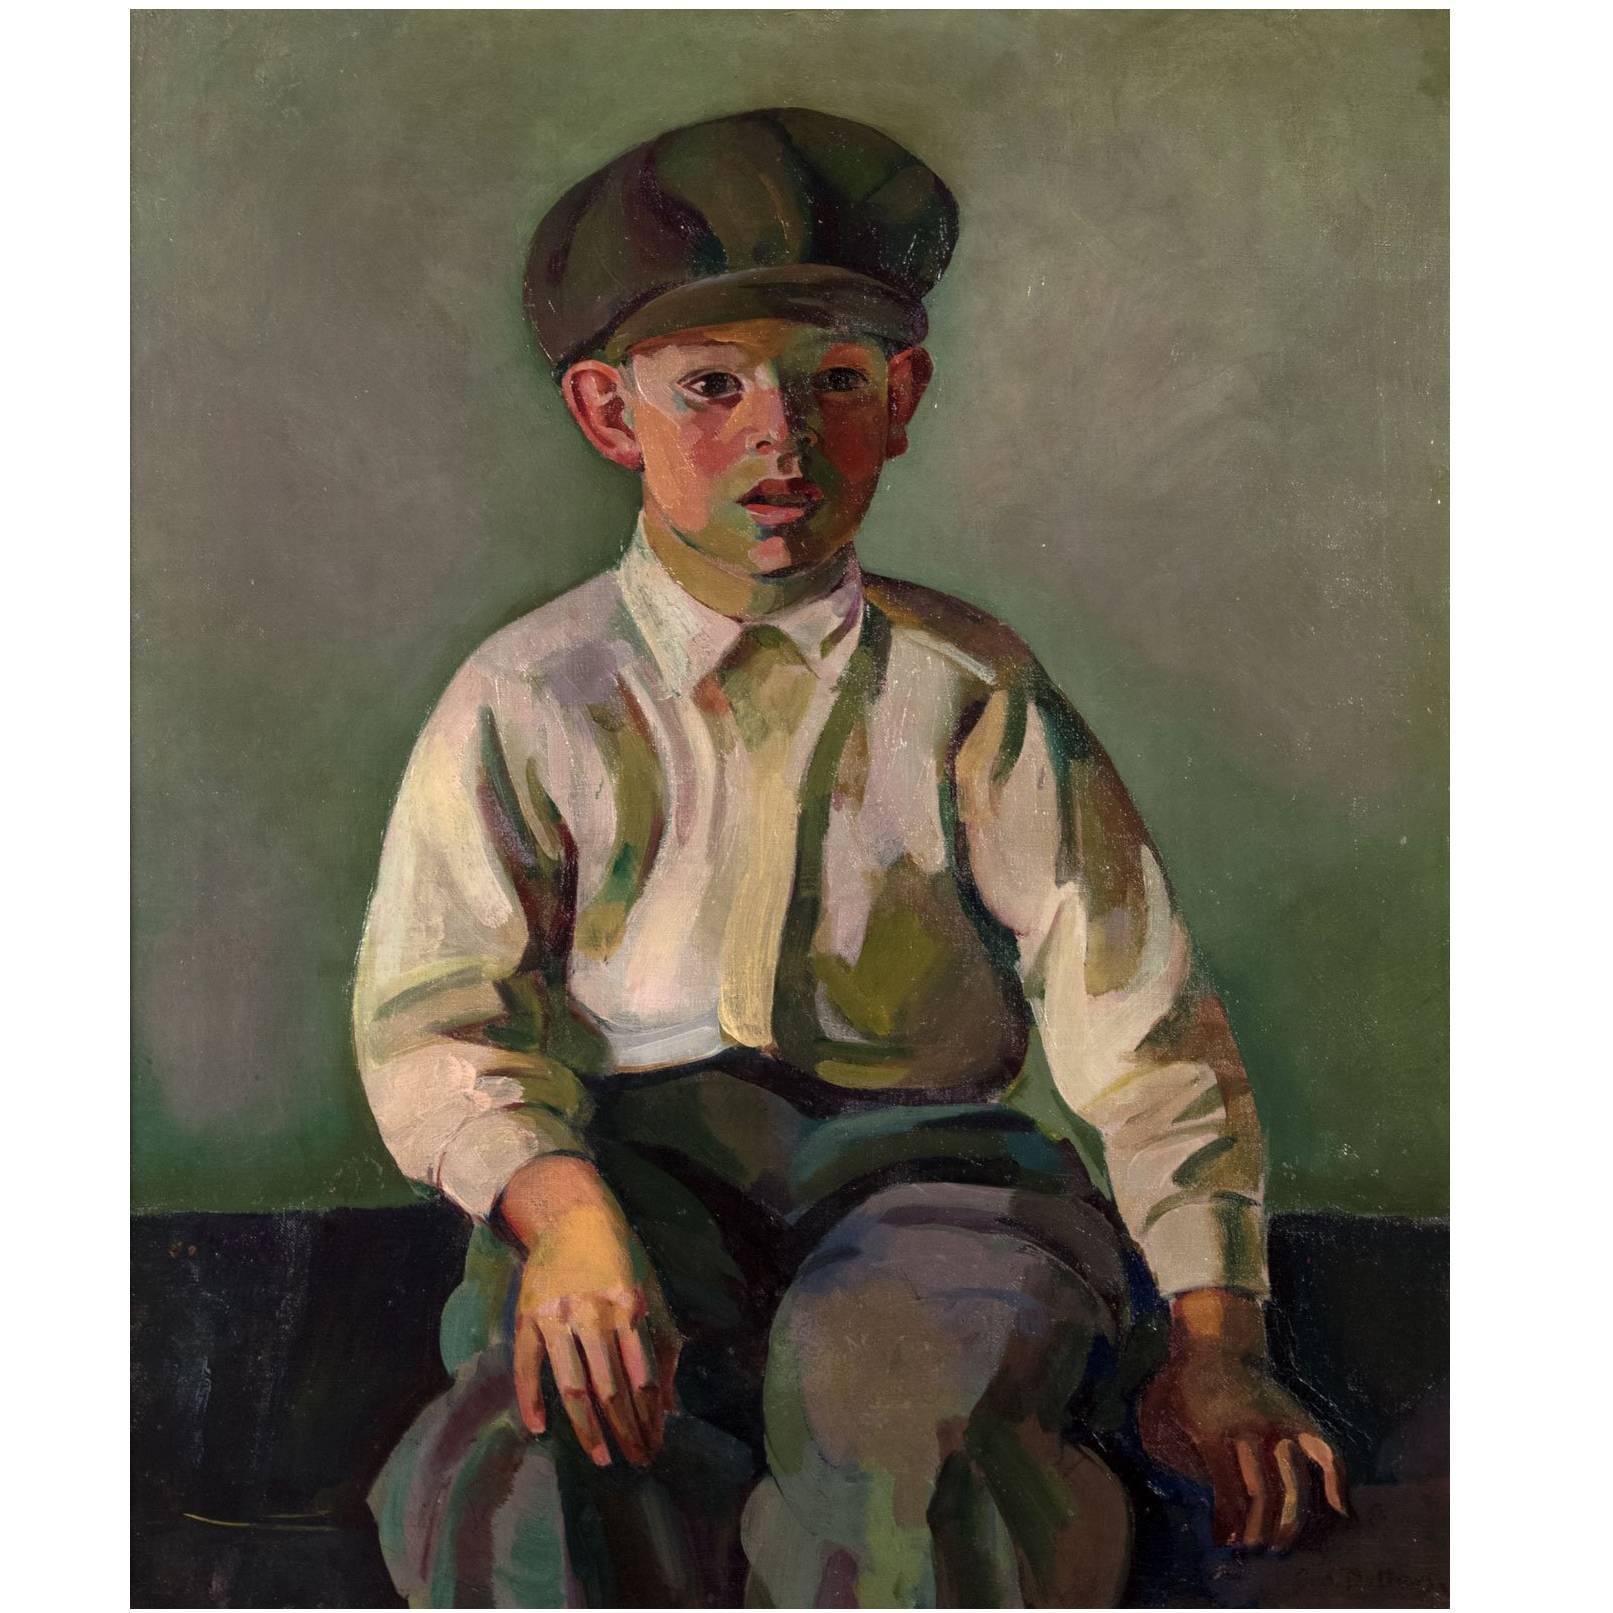 Portrait of a Young Boy (c. 1910) by George Bellows